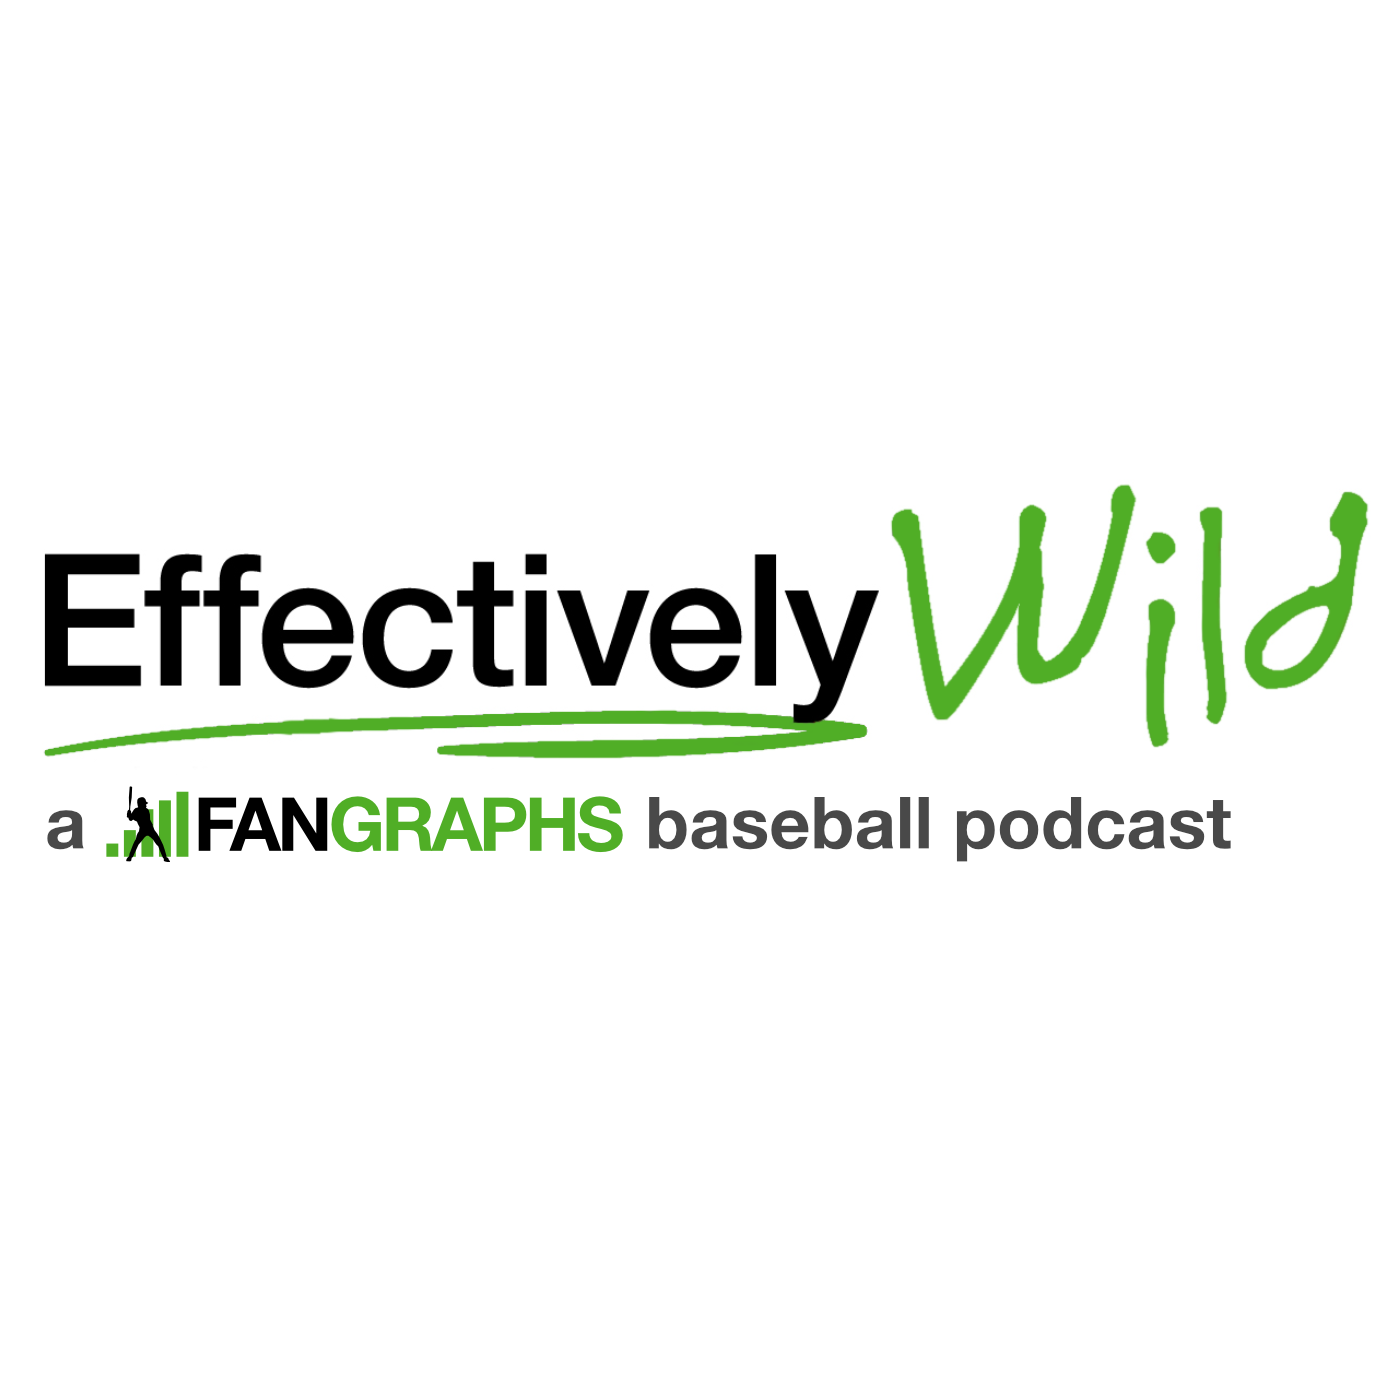 A highlight from Effectively Wild Episode 1991: Mascot Moment